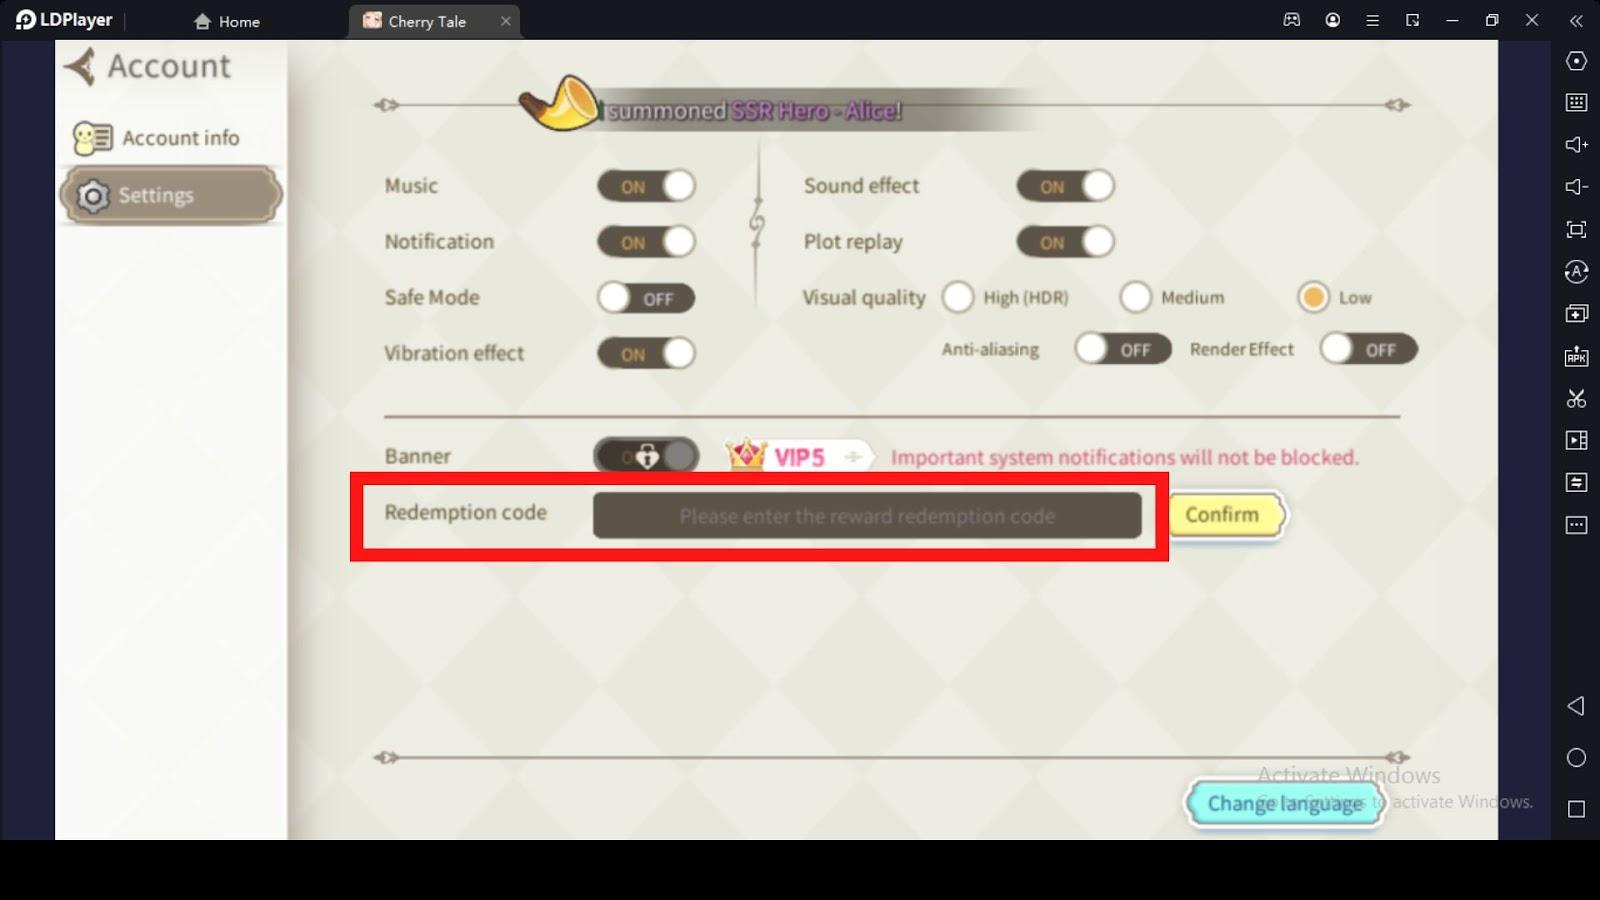 How to Redeem Cherry Tale Codes